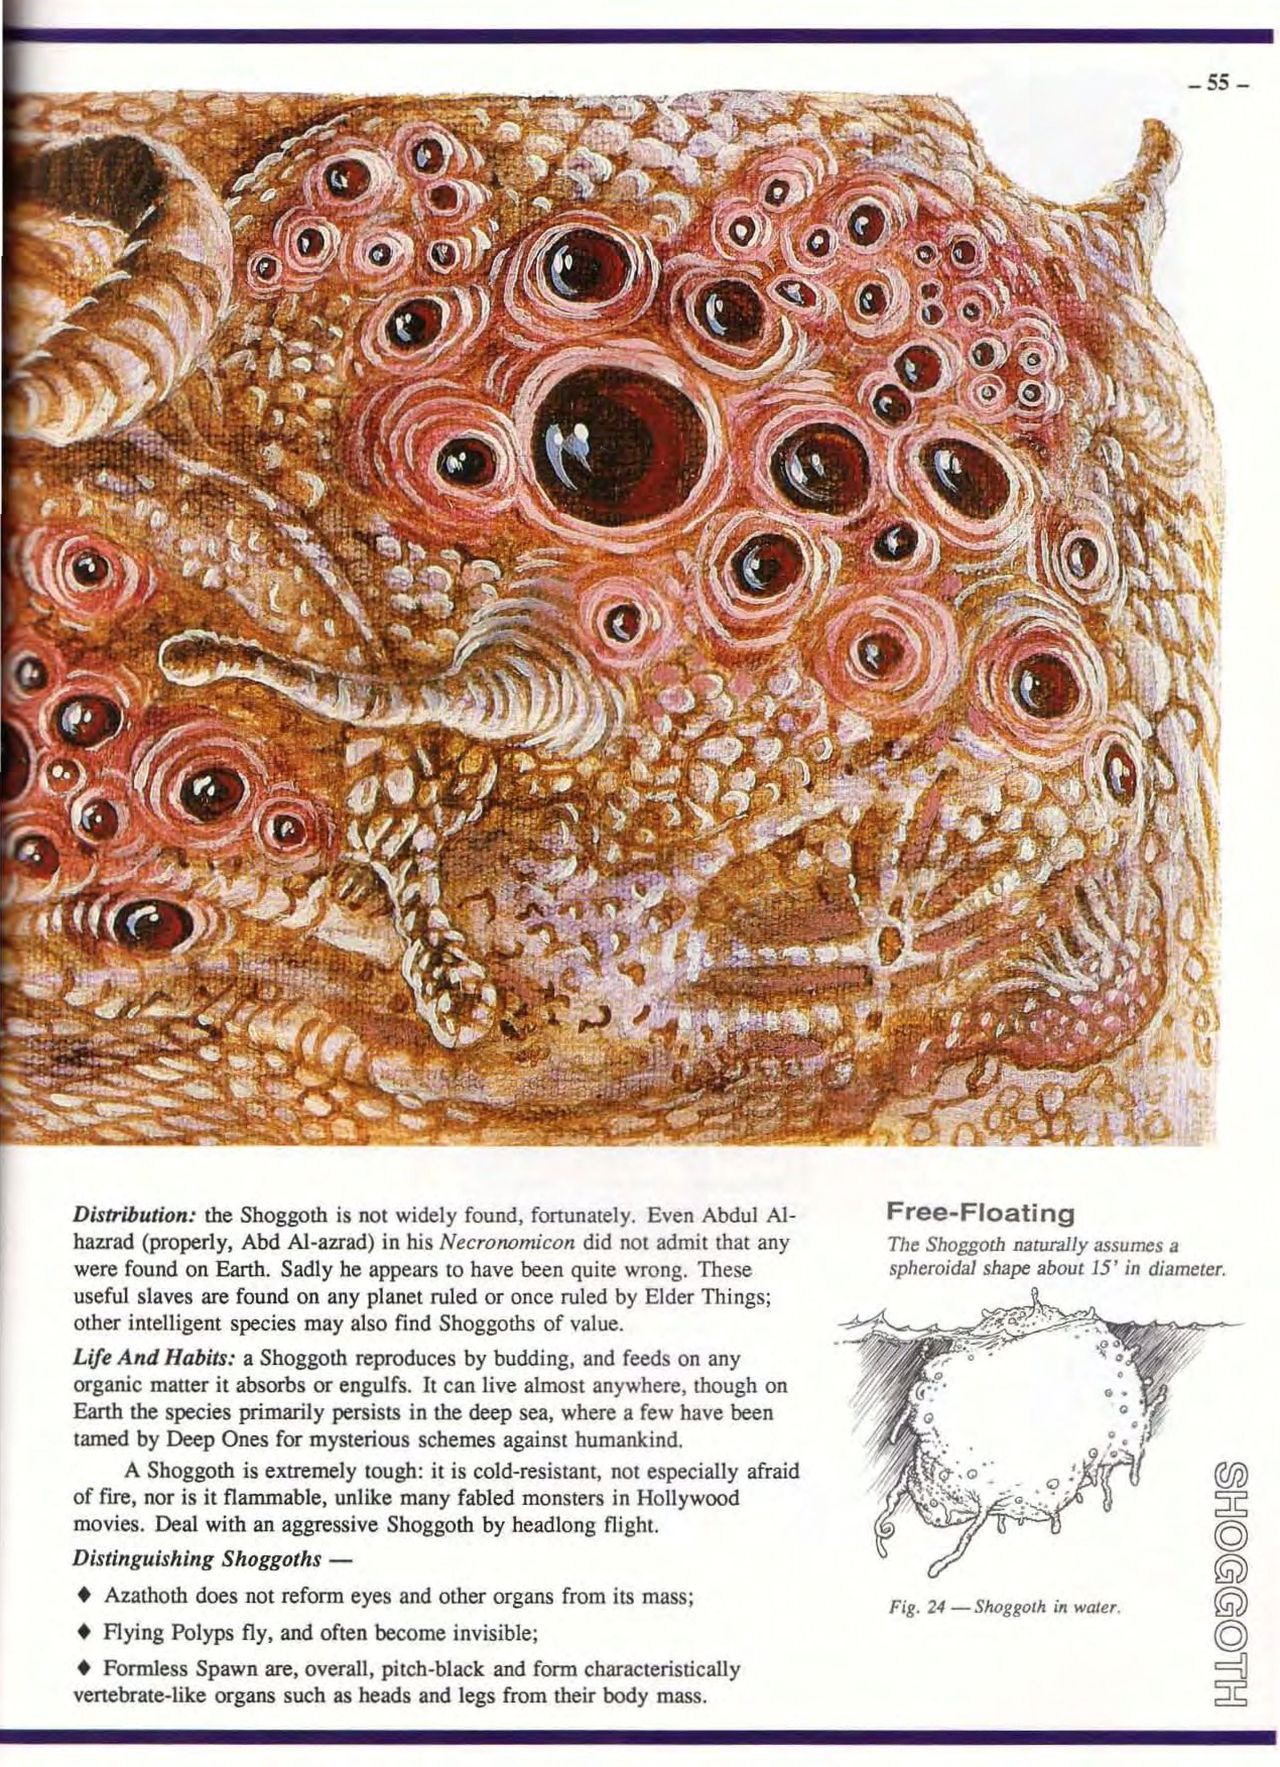 S. Petersen's Field Guide to Lovecraftian Horrors 55